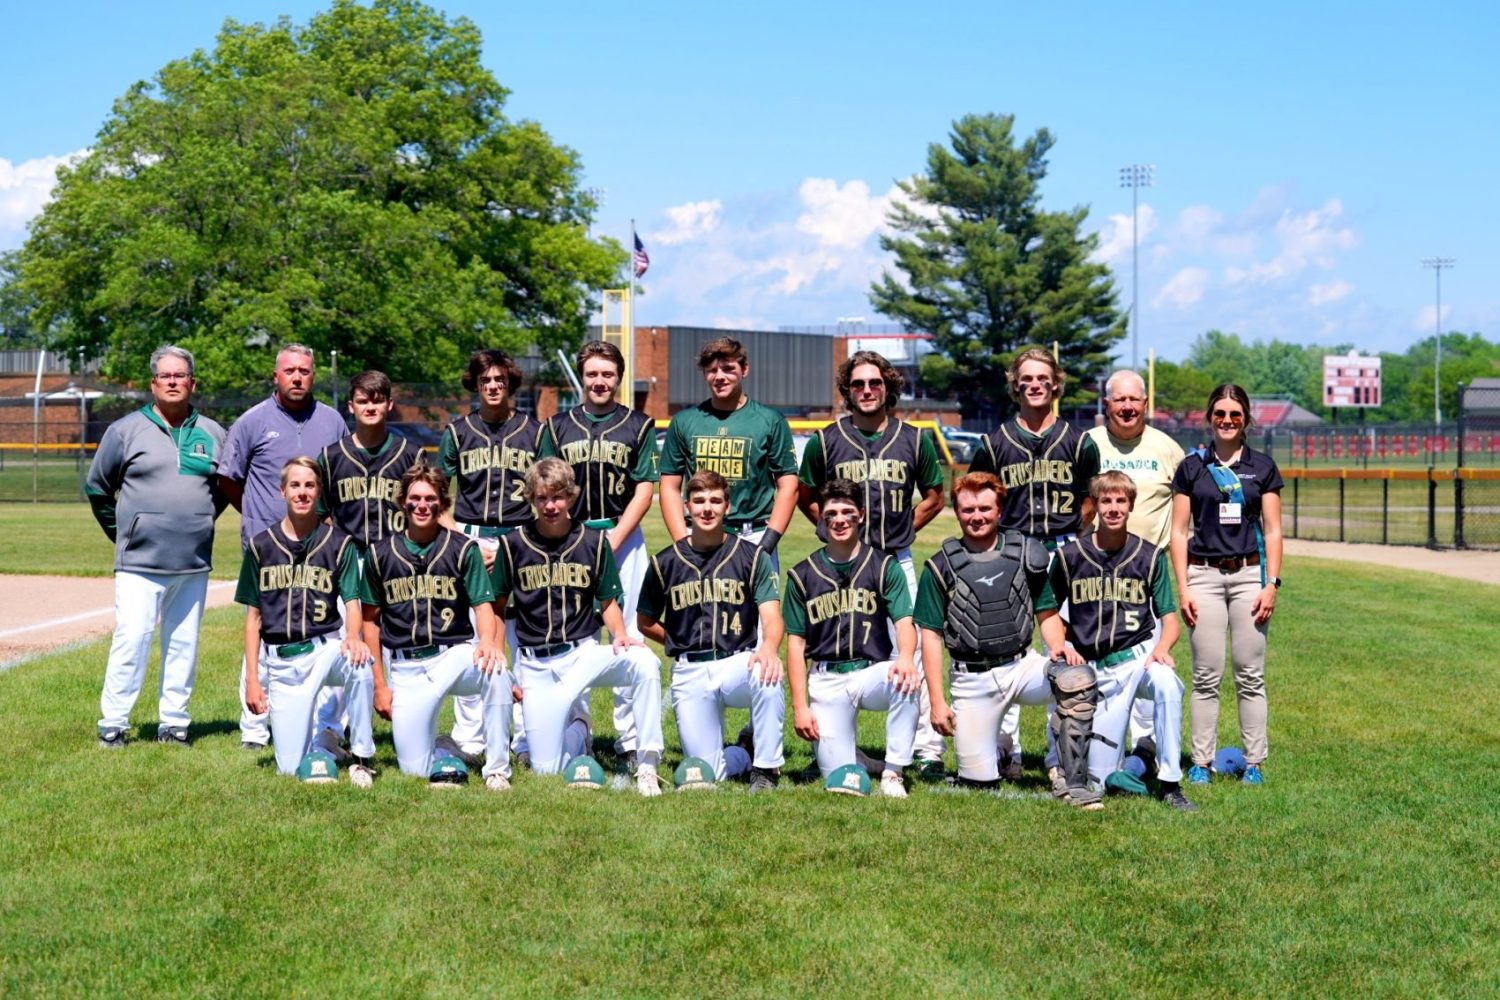 Muskegon Catholic Central advances to baseball regional finals with 8-1 win over White Cloud